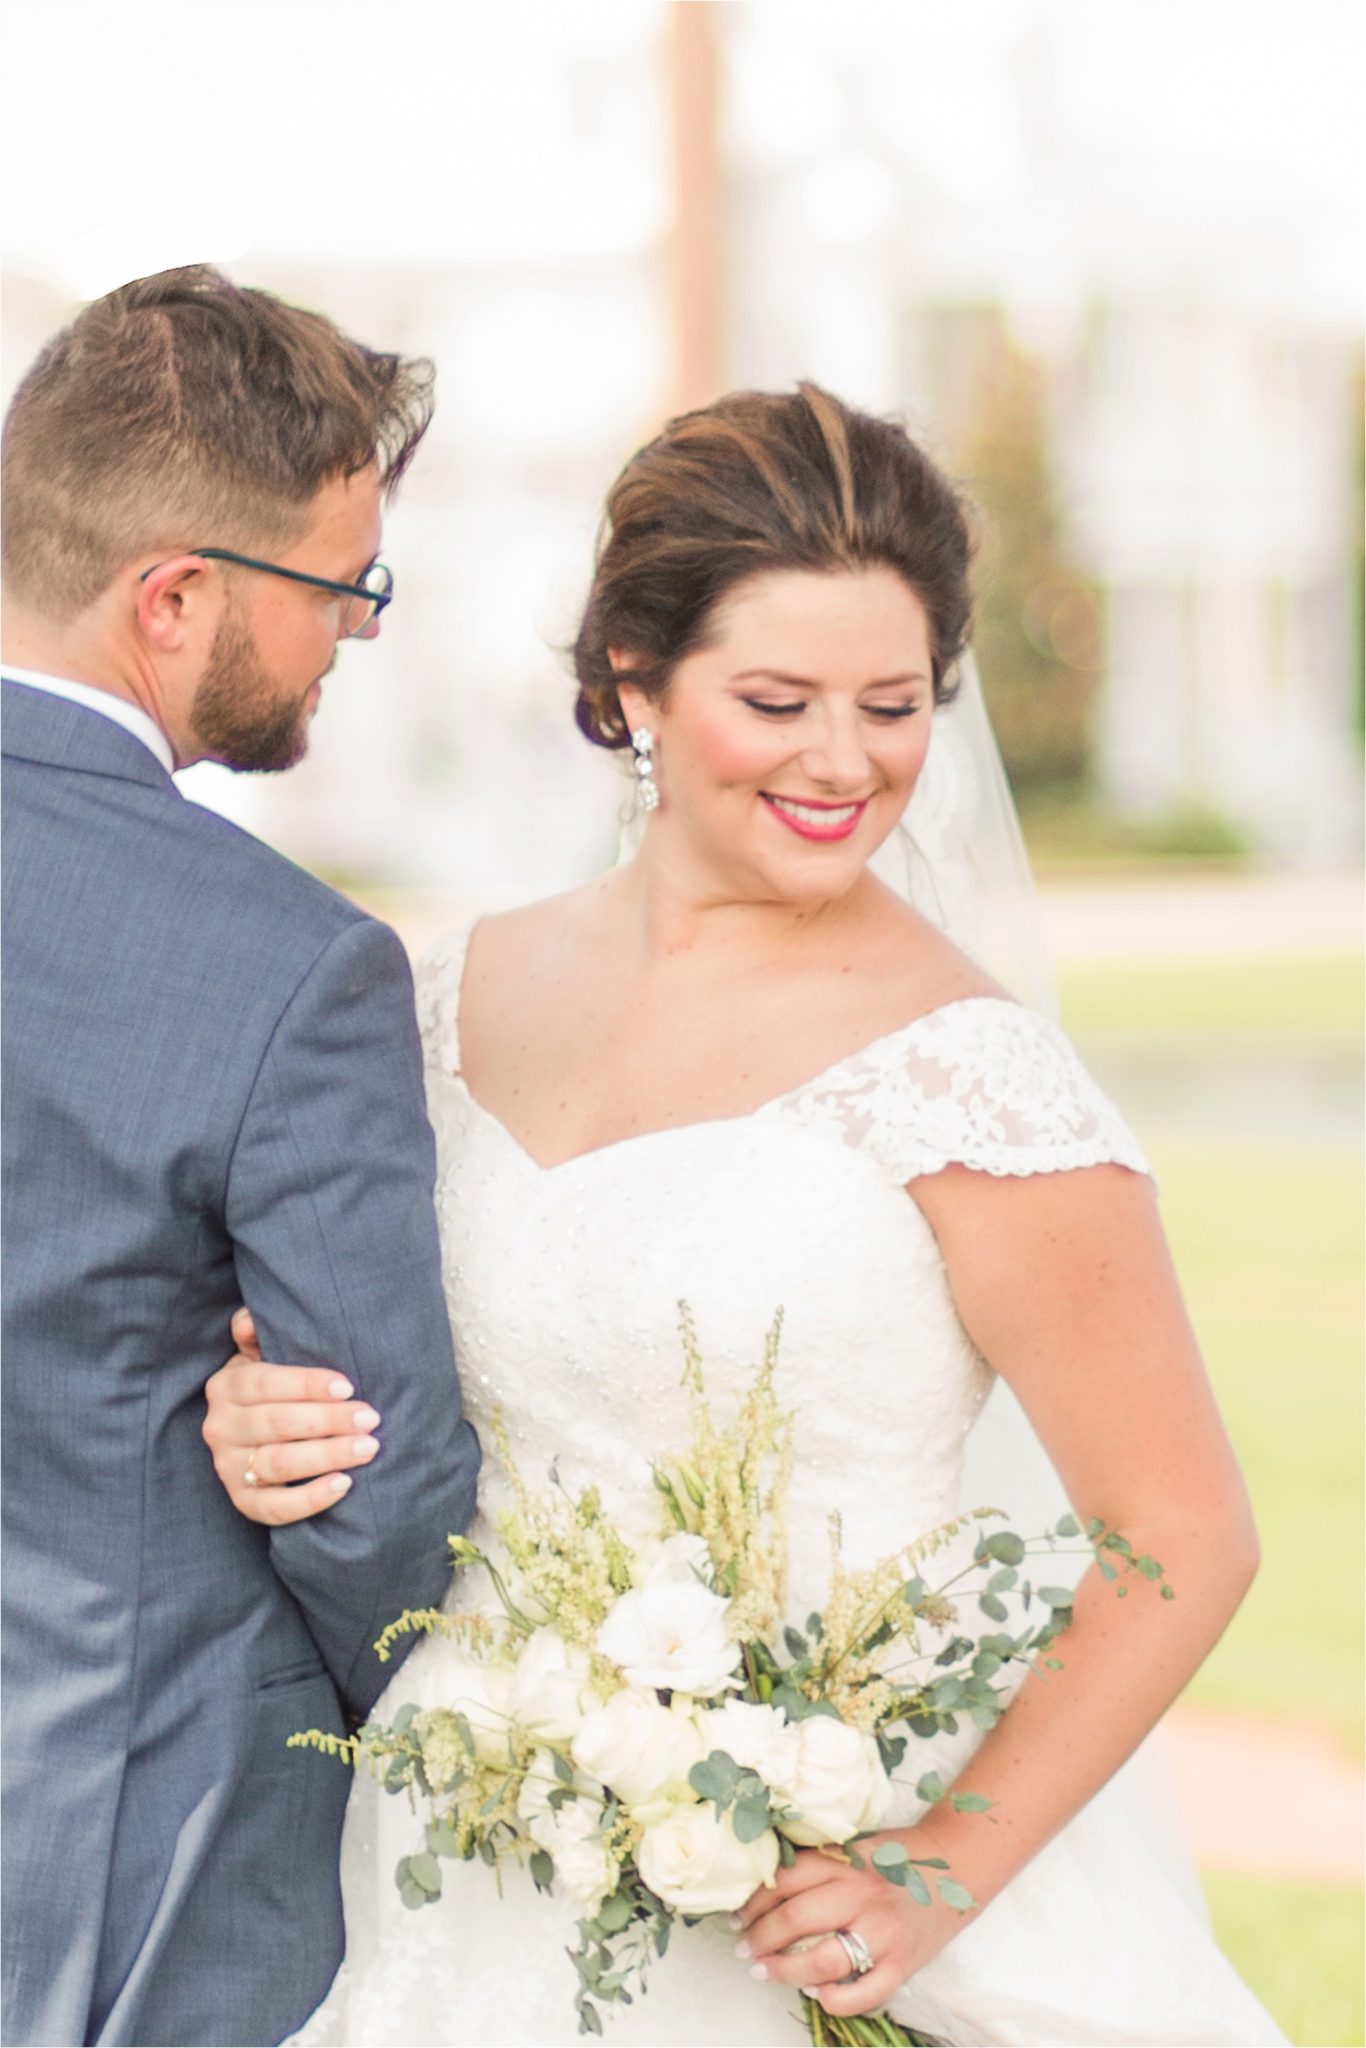 Pastel Themed Wedding-The Chapel at the Waters-Montgomery Alabama Photographer-Miles & Meredyth-Blue Themed Wedding-Navy Blue Groom Attire-Wedding Dress-Bride Bouquet